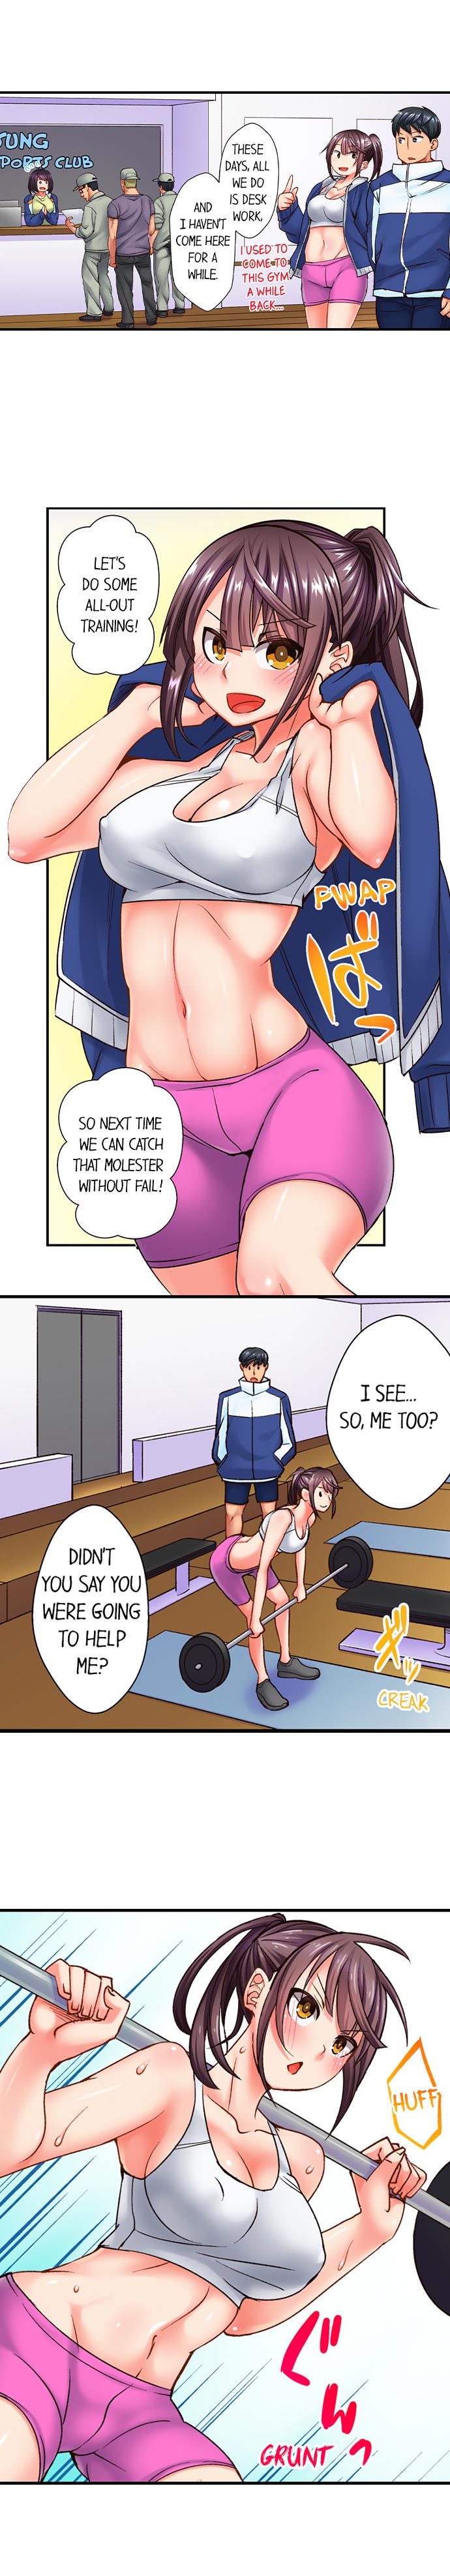 You Cum, You Lose! – Wrestling with a Pervert - Chapter 13 Page 4